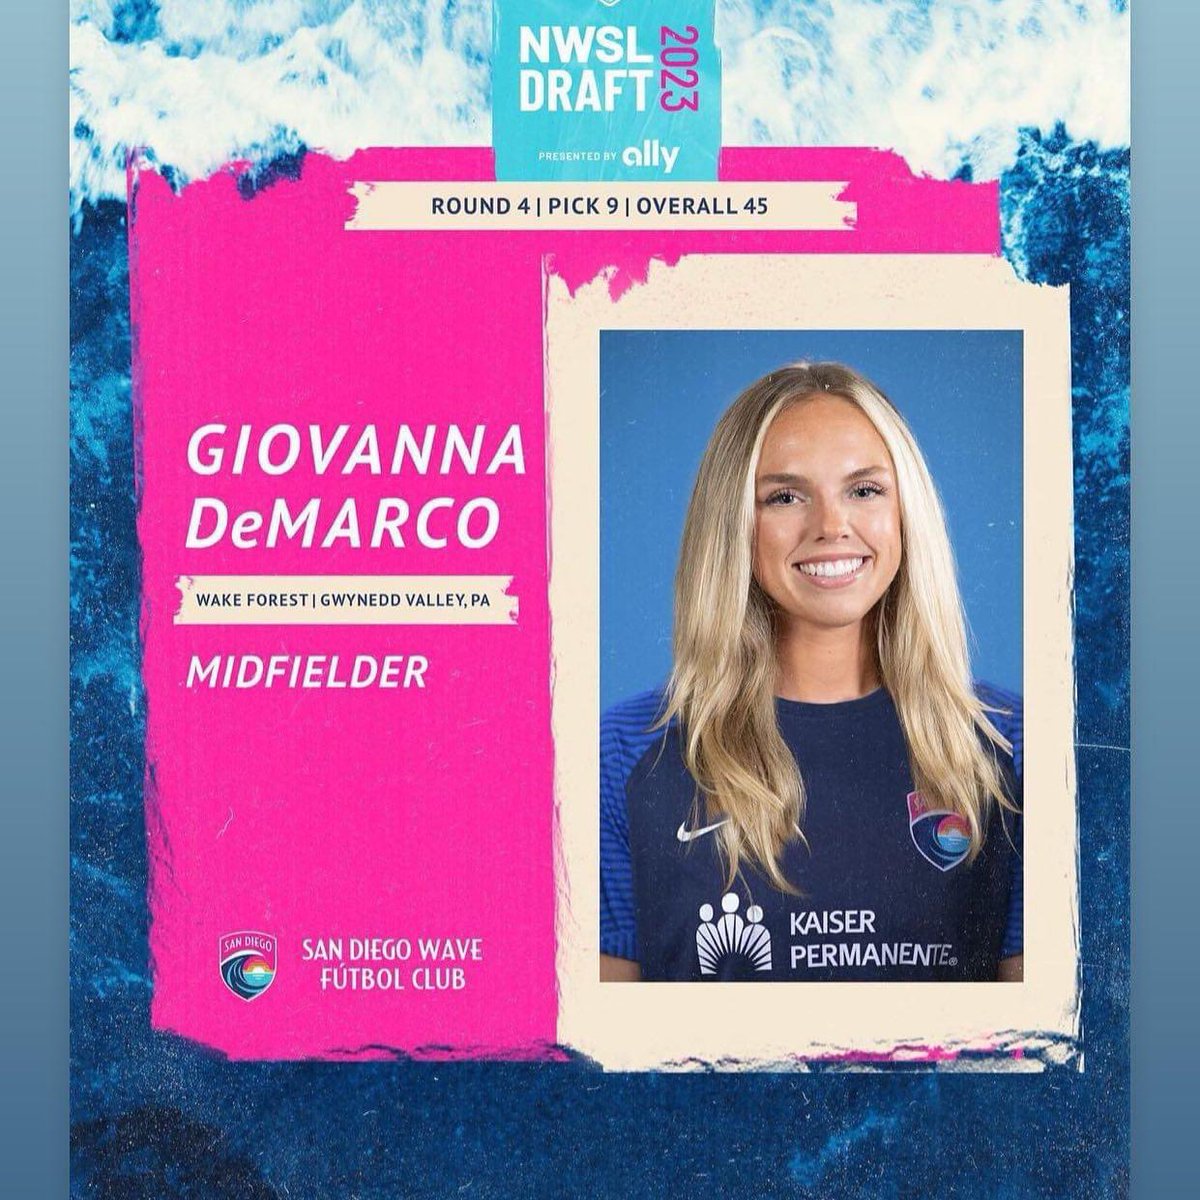 Congratulations to Gi Demarco !! Drafted to play for San Diego Wave!  ⭐️#pcproud #nwsldraft #hardworkpaysoff